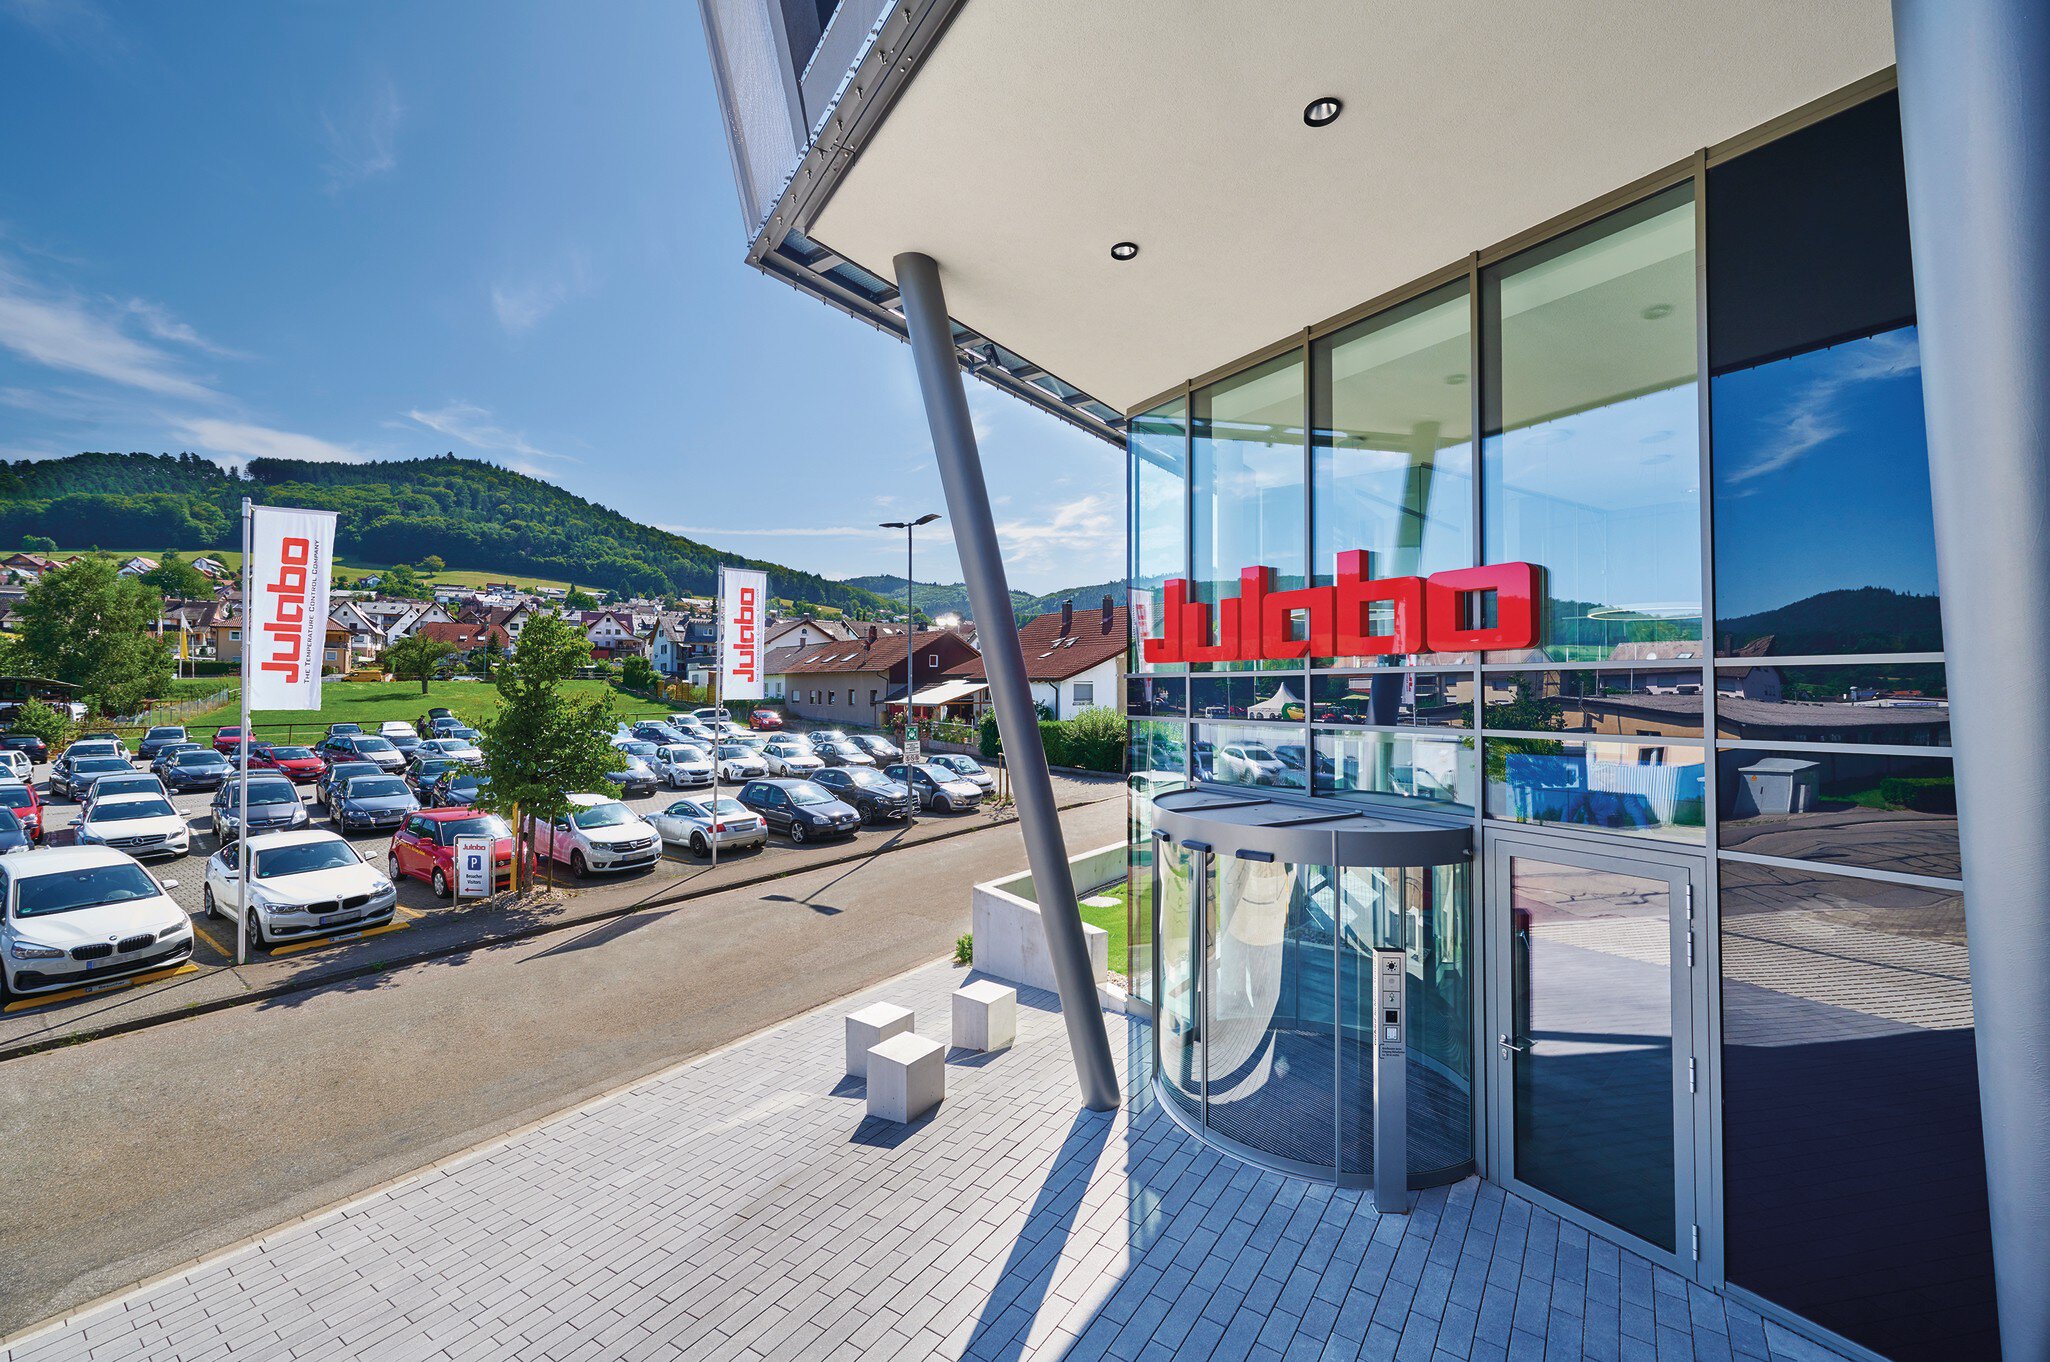 Visitor entrance to the headquarters of JULABO GmbH in Seelbach